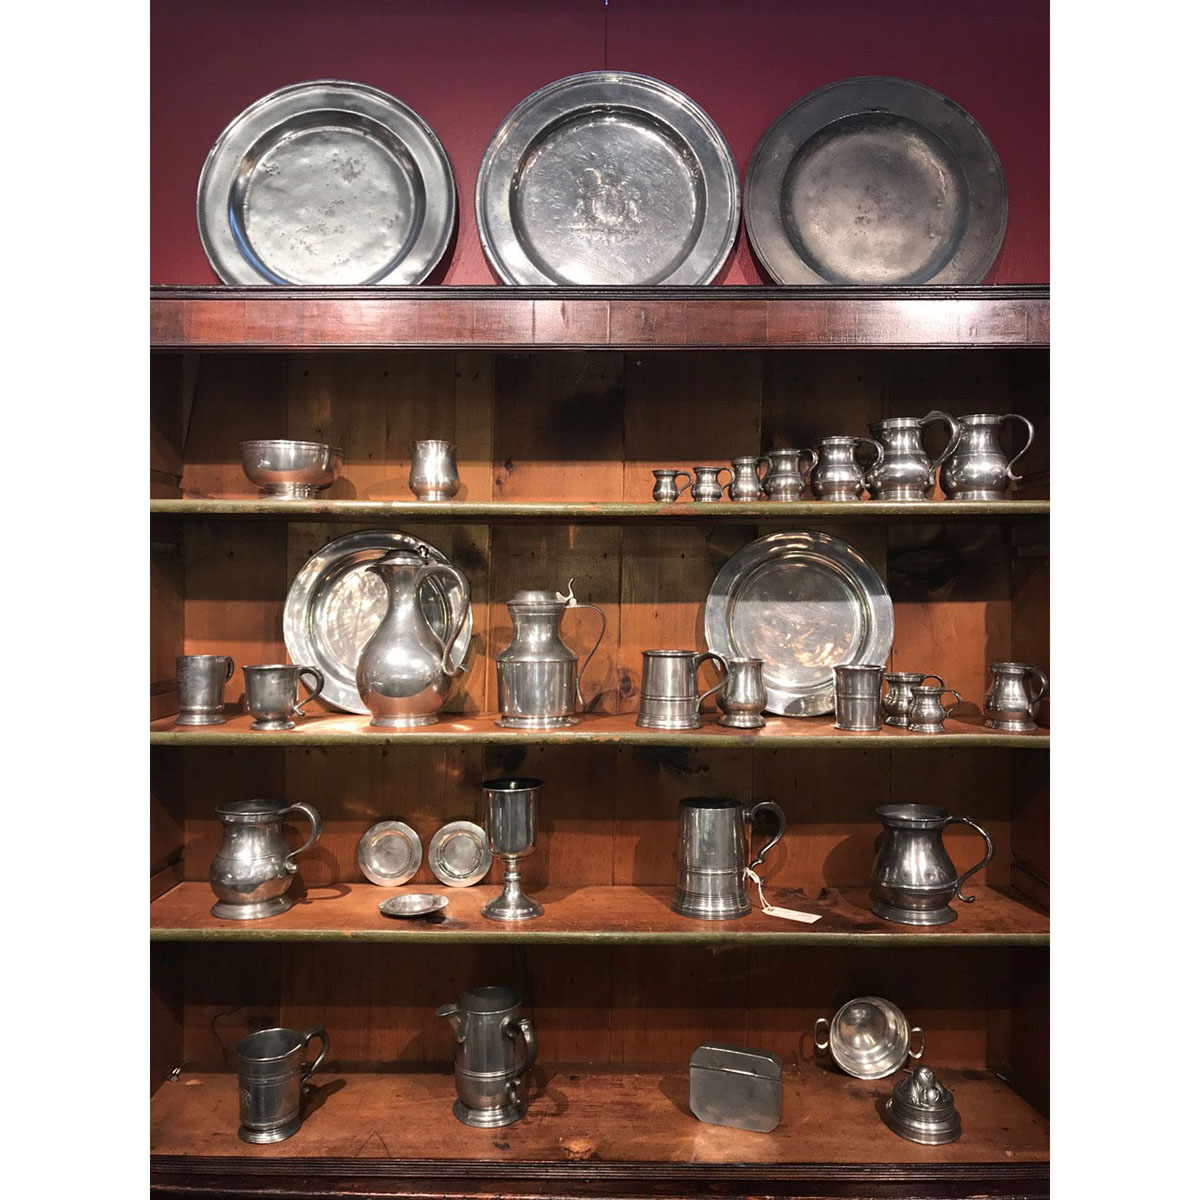 Approximately 37 Pieces of English Pewter, 17th, 18th, 19th and early 20th centuries